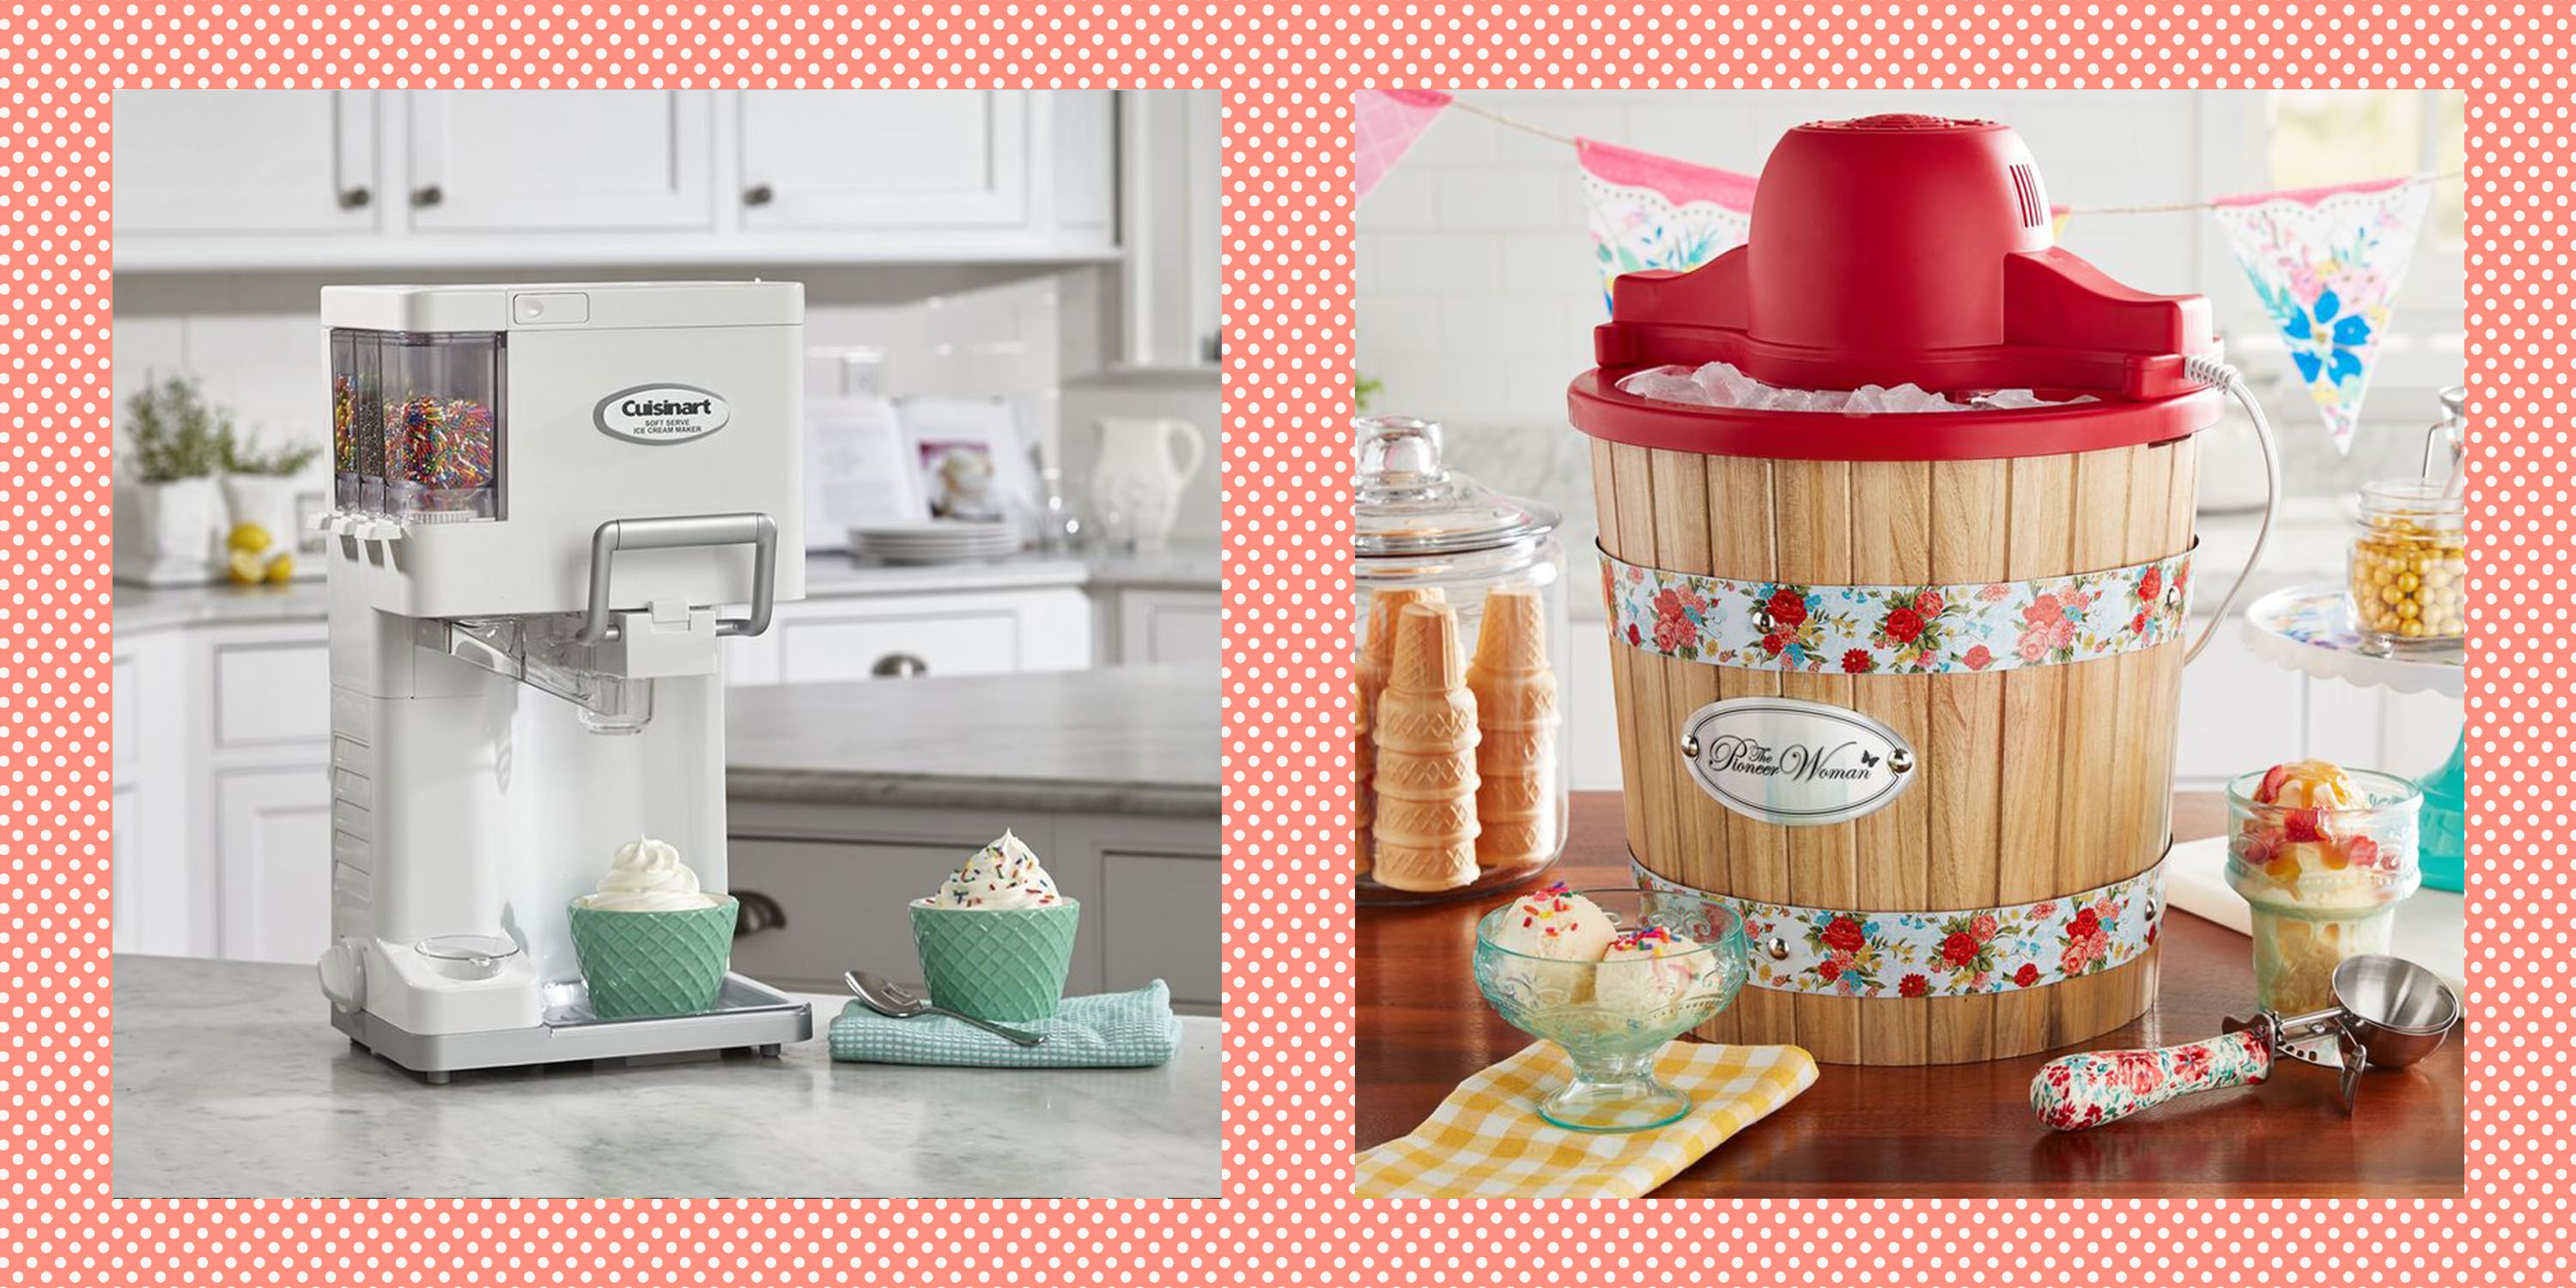 The Pioneer Woman Ice Cream Maker at Walmart - Ree's Ice Cream Maker Is On  Sale